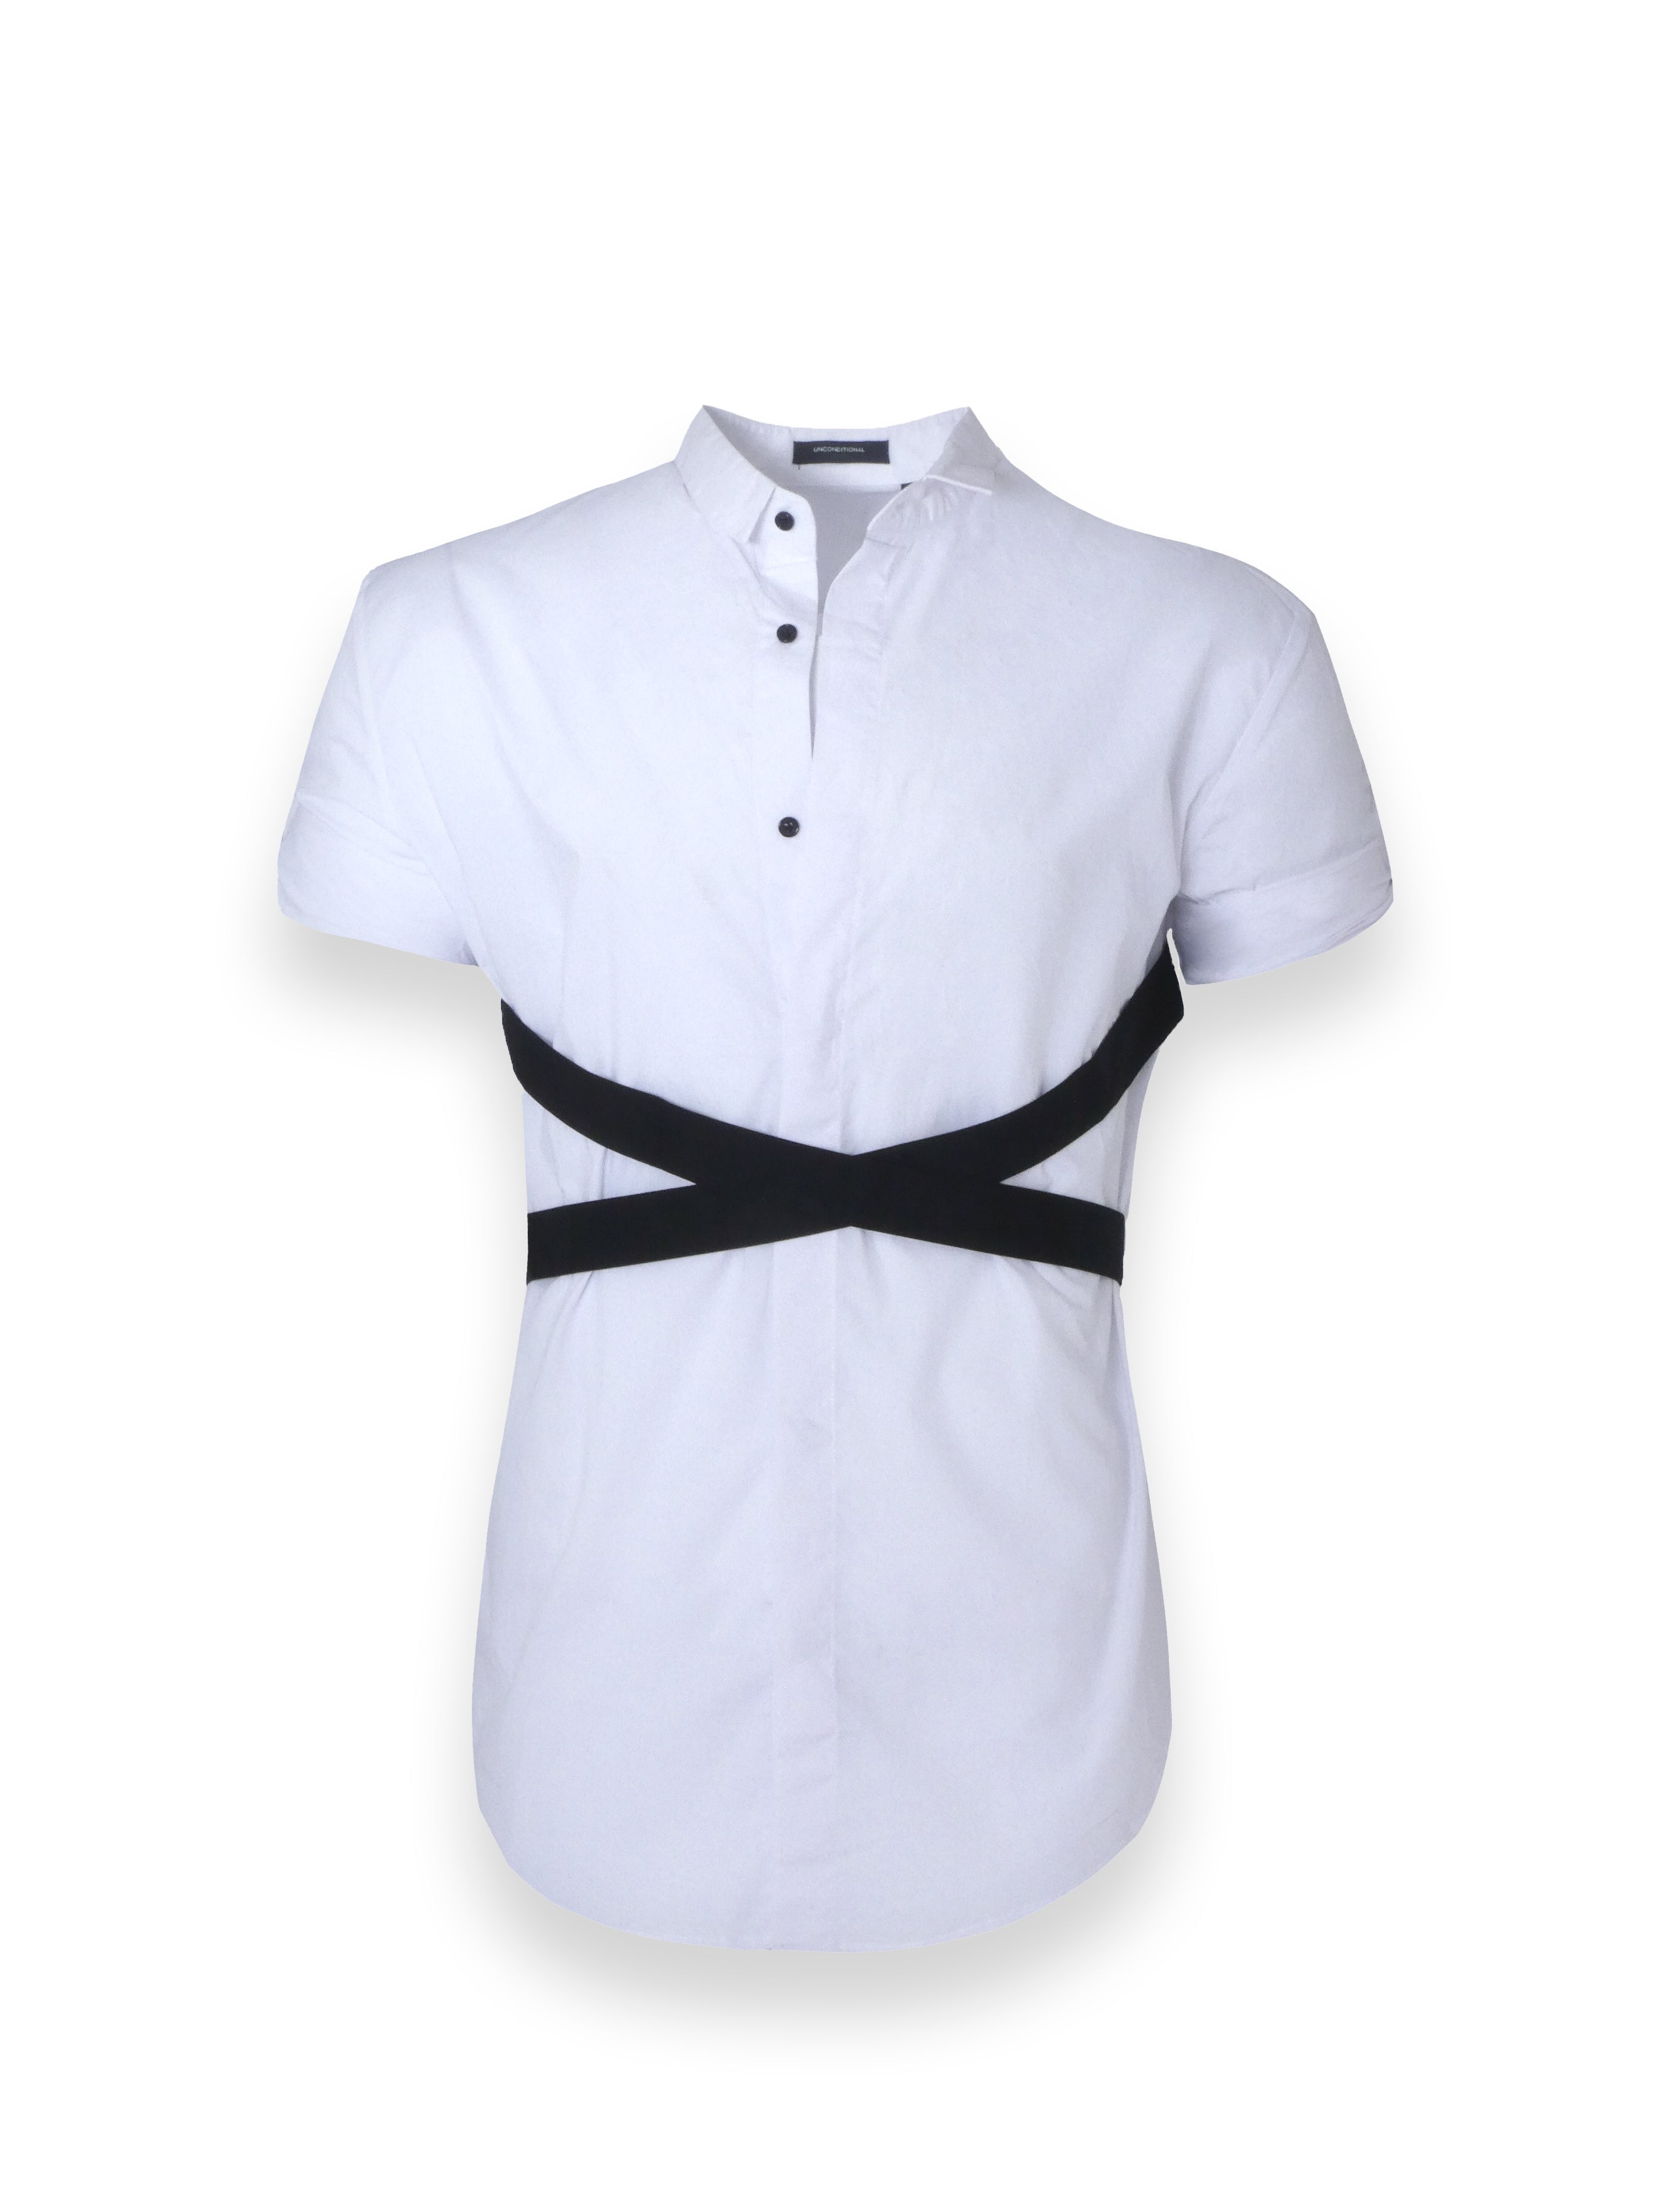 White Shirt With Black Button Up Straps